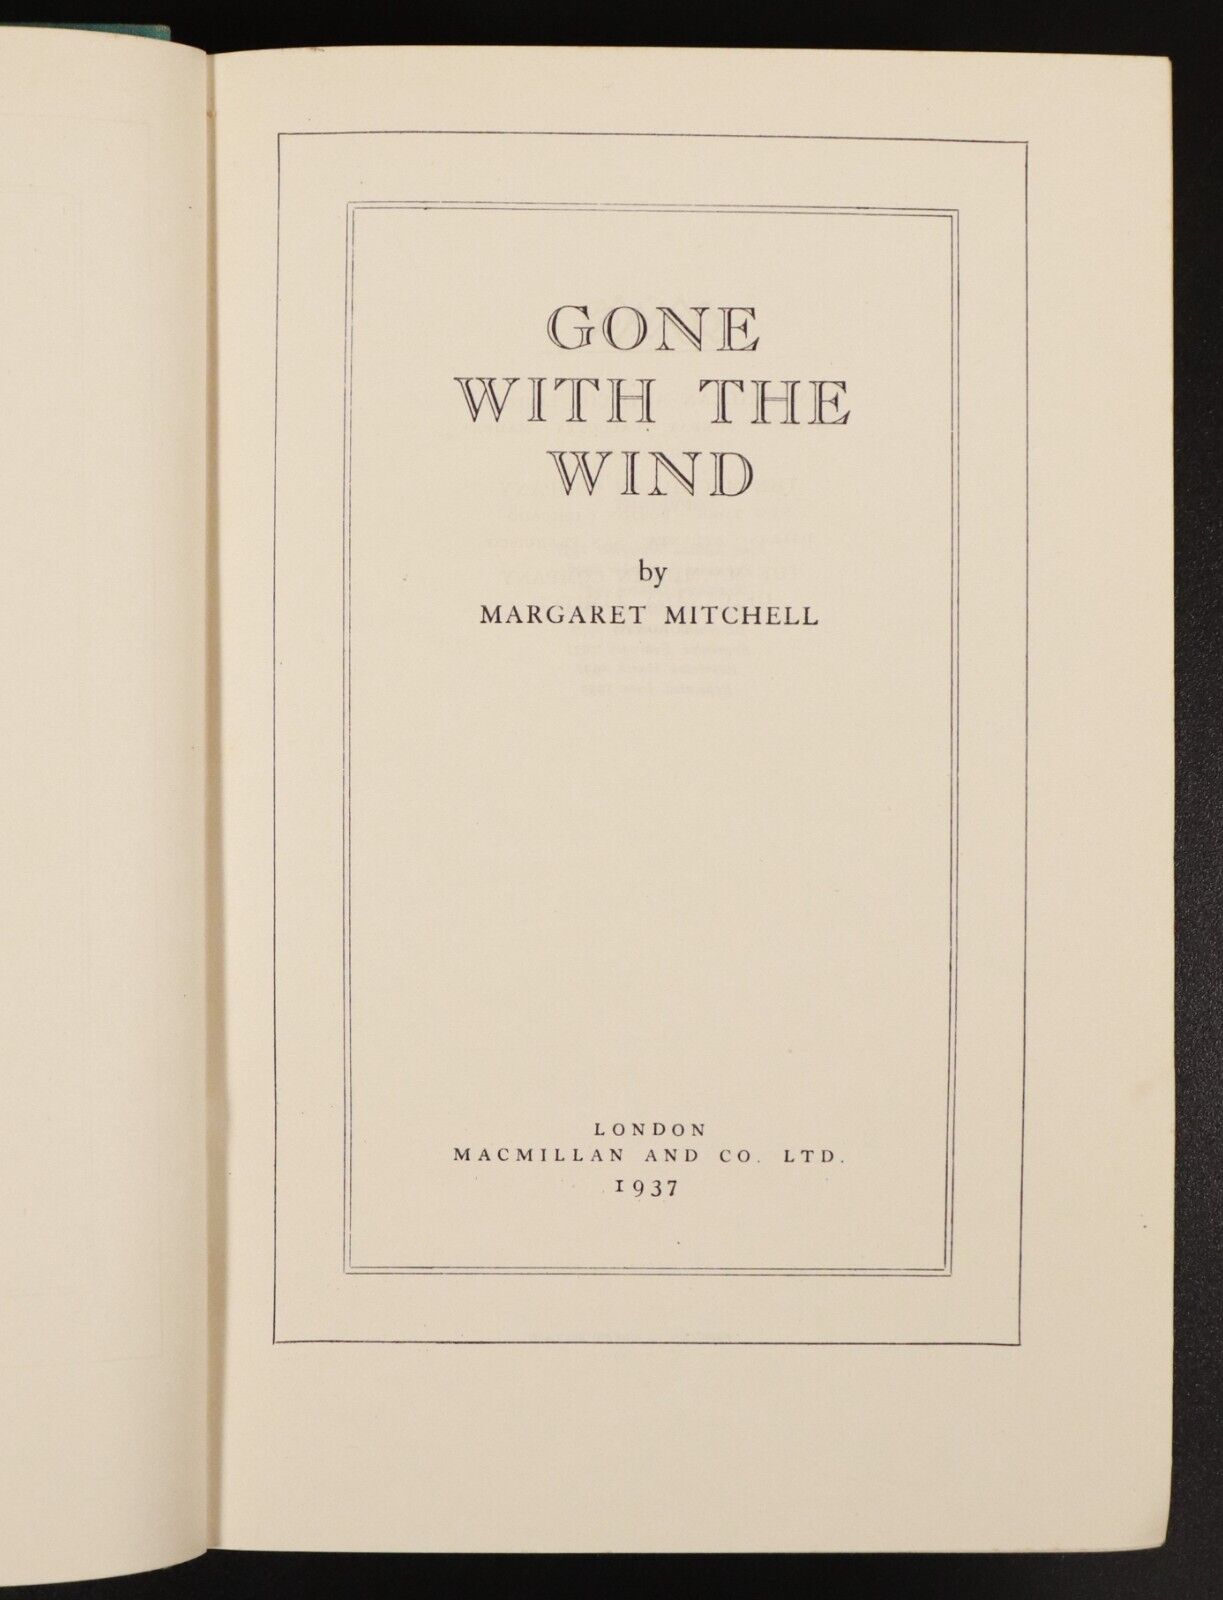 1937 Gone With The Wind by Margaret Mitchell Antique Classic Fiction Book - 0